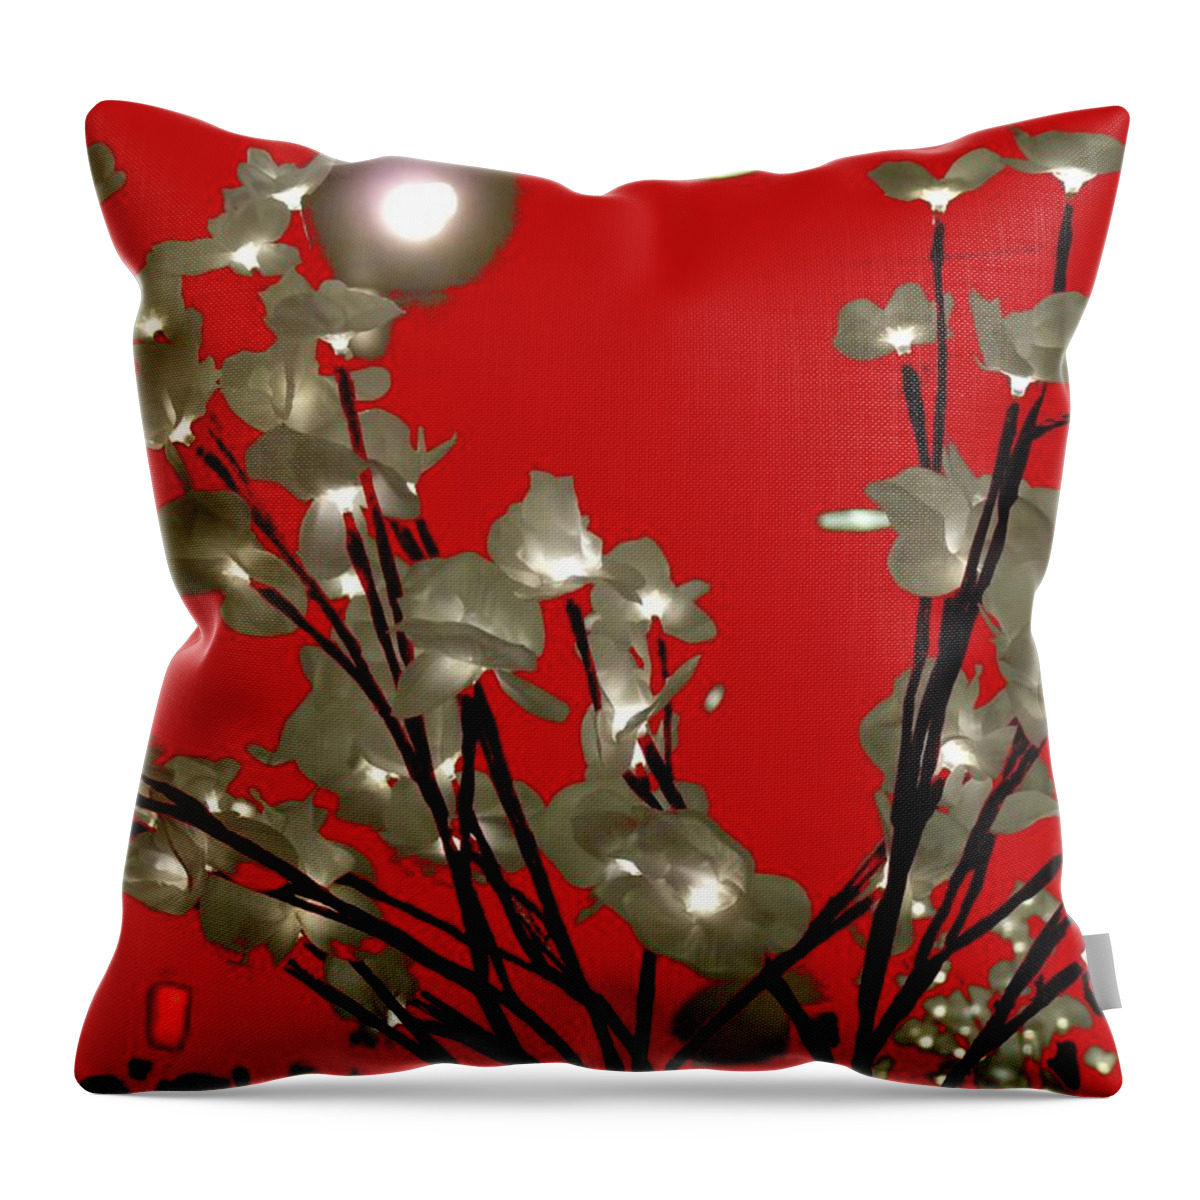 Abstract Throw Pillow featuring the digital art Asian Influence by T Oliver